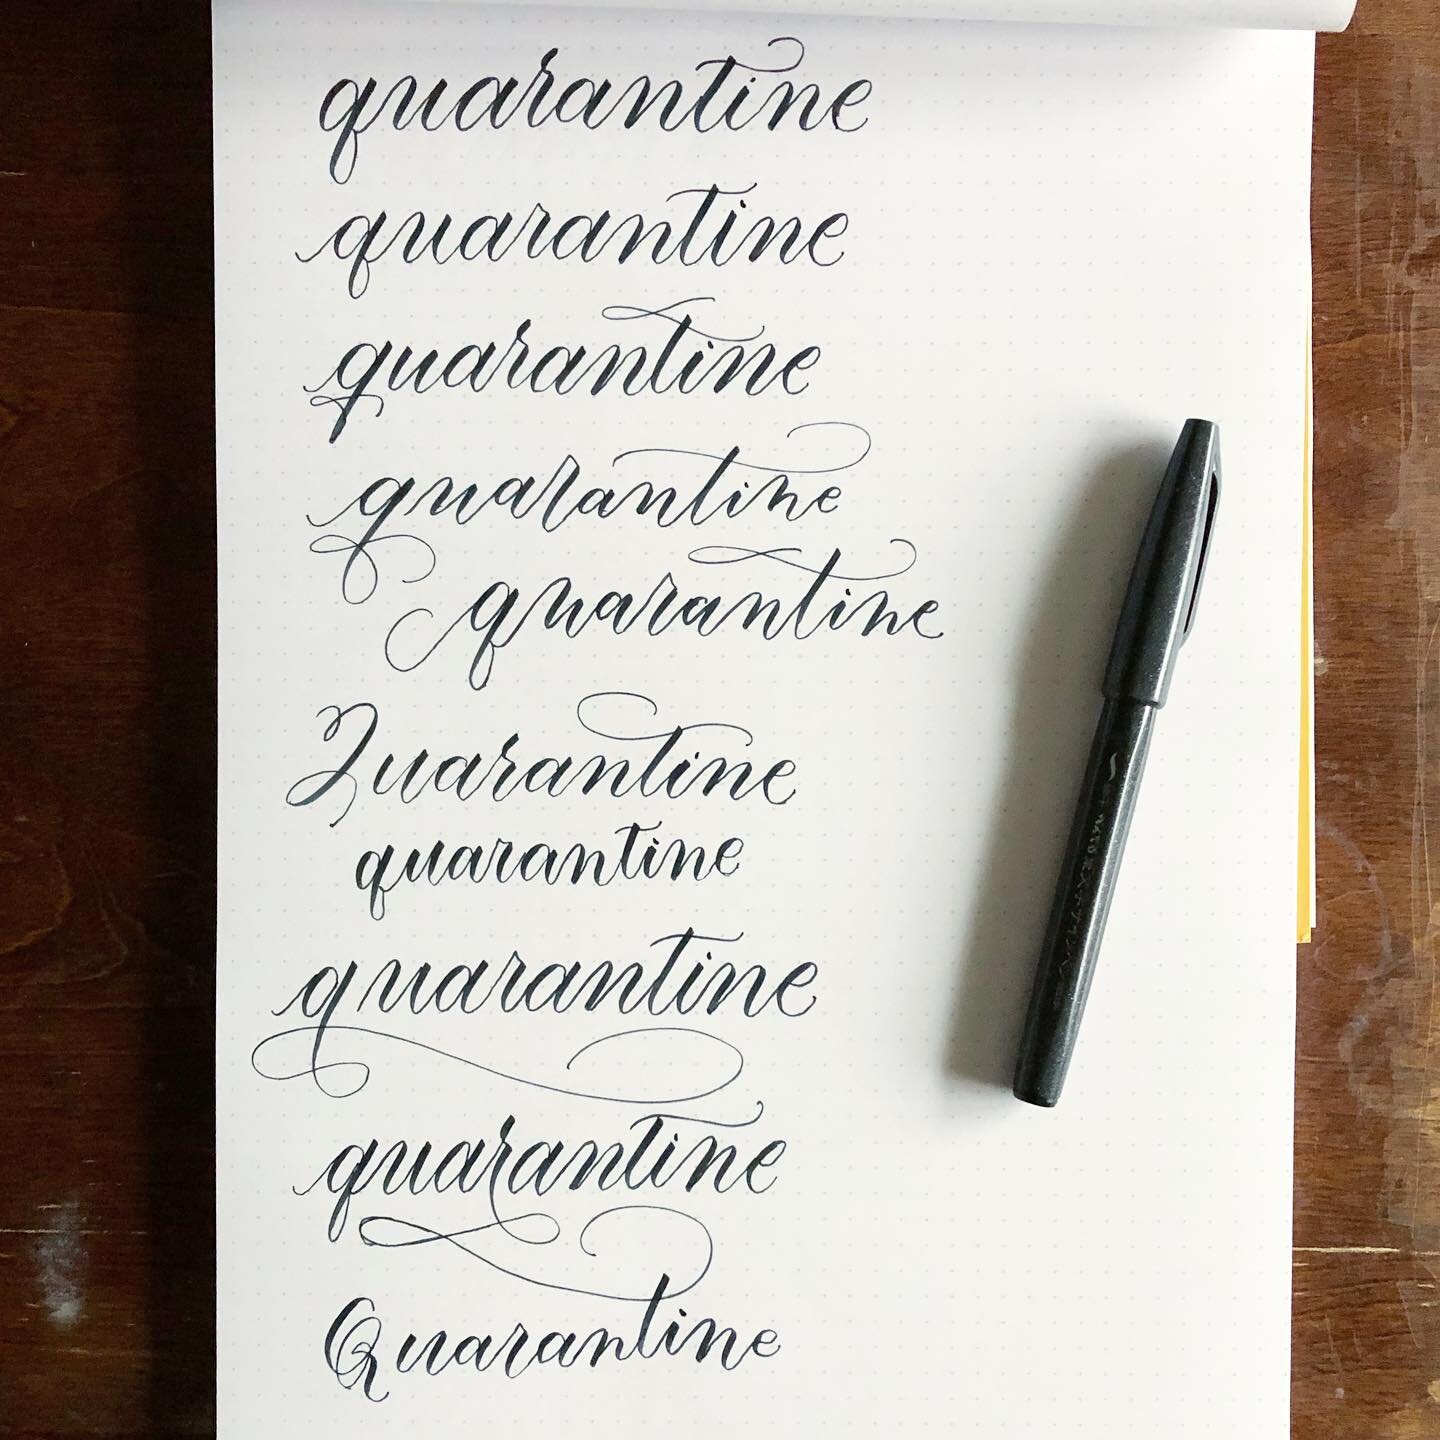 #covid_19 plans? Practicing calligraphy. ☺️ Trying my best to fill my time with things that build and reward skill. I didn&rsquo;t think of quarantine as a beautiful word before this exercise!